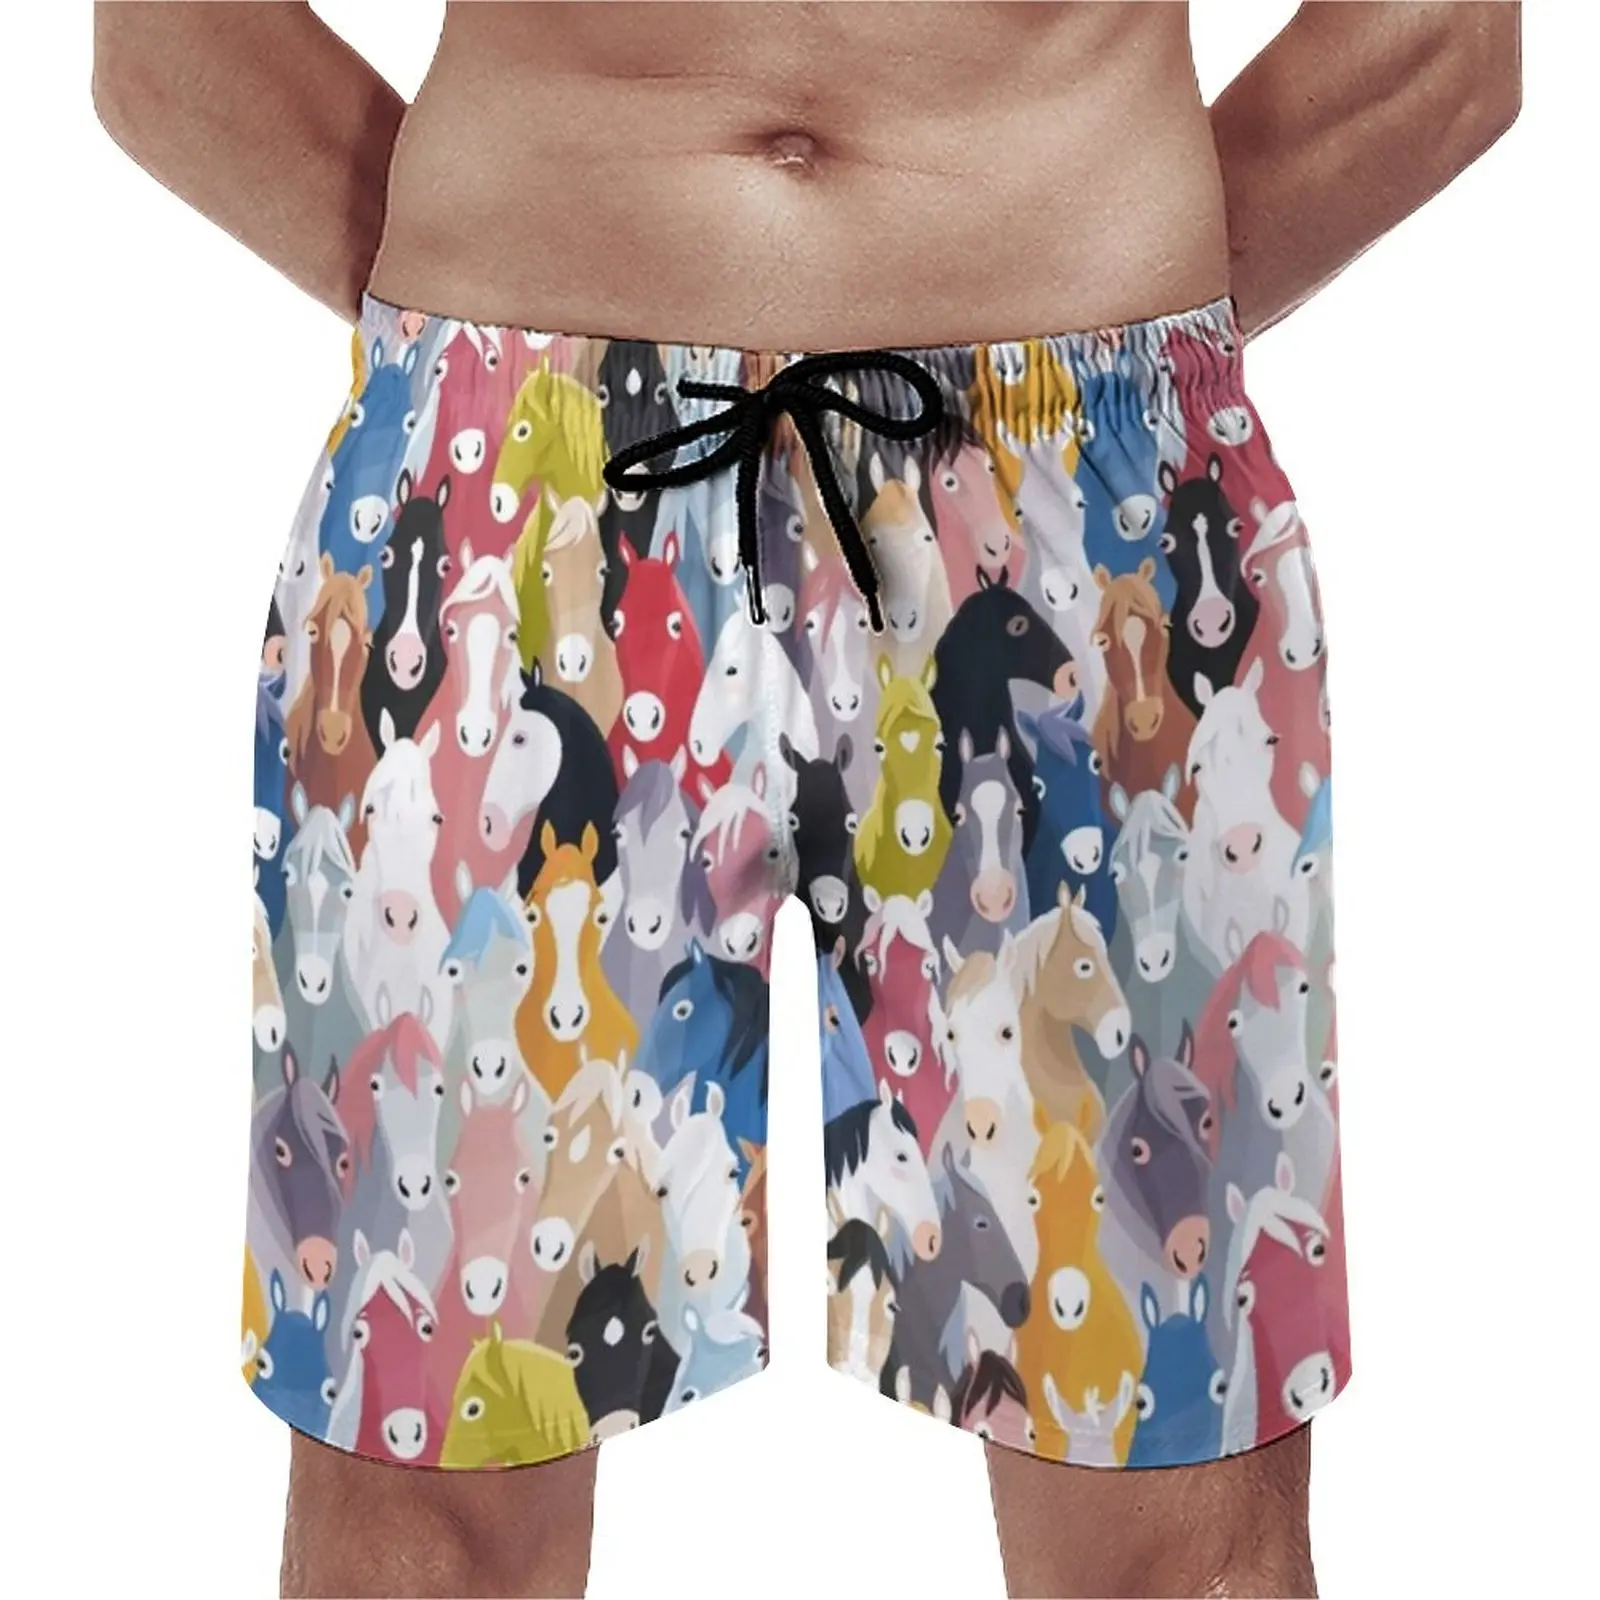 

Funny Horse Board Shorts Summer Neigh Neigh Colorful Cute Horses Running Surf Board Short Pants Men Quick Dry Casual Swim Trunks